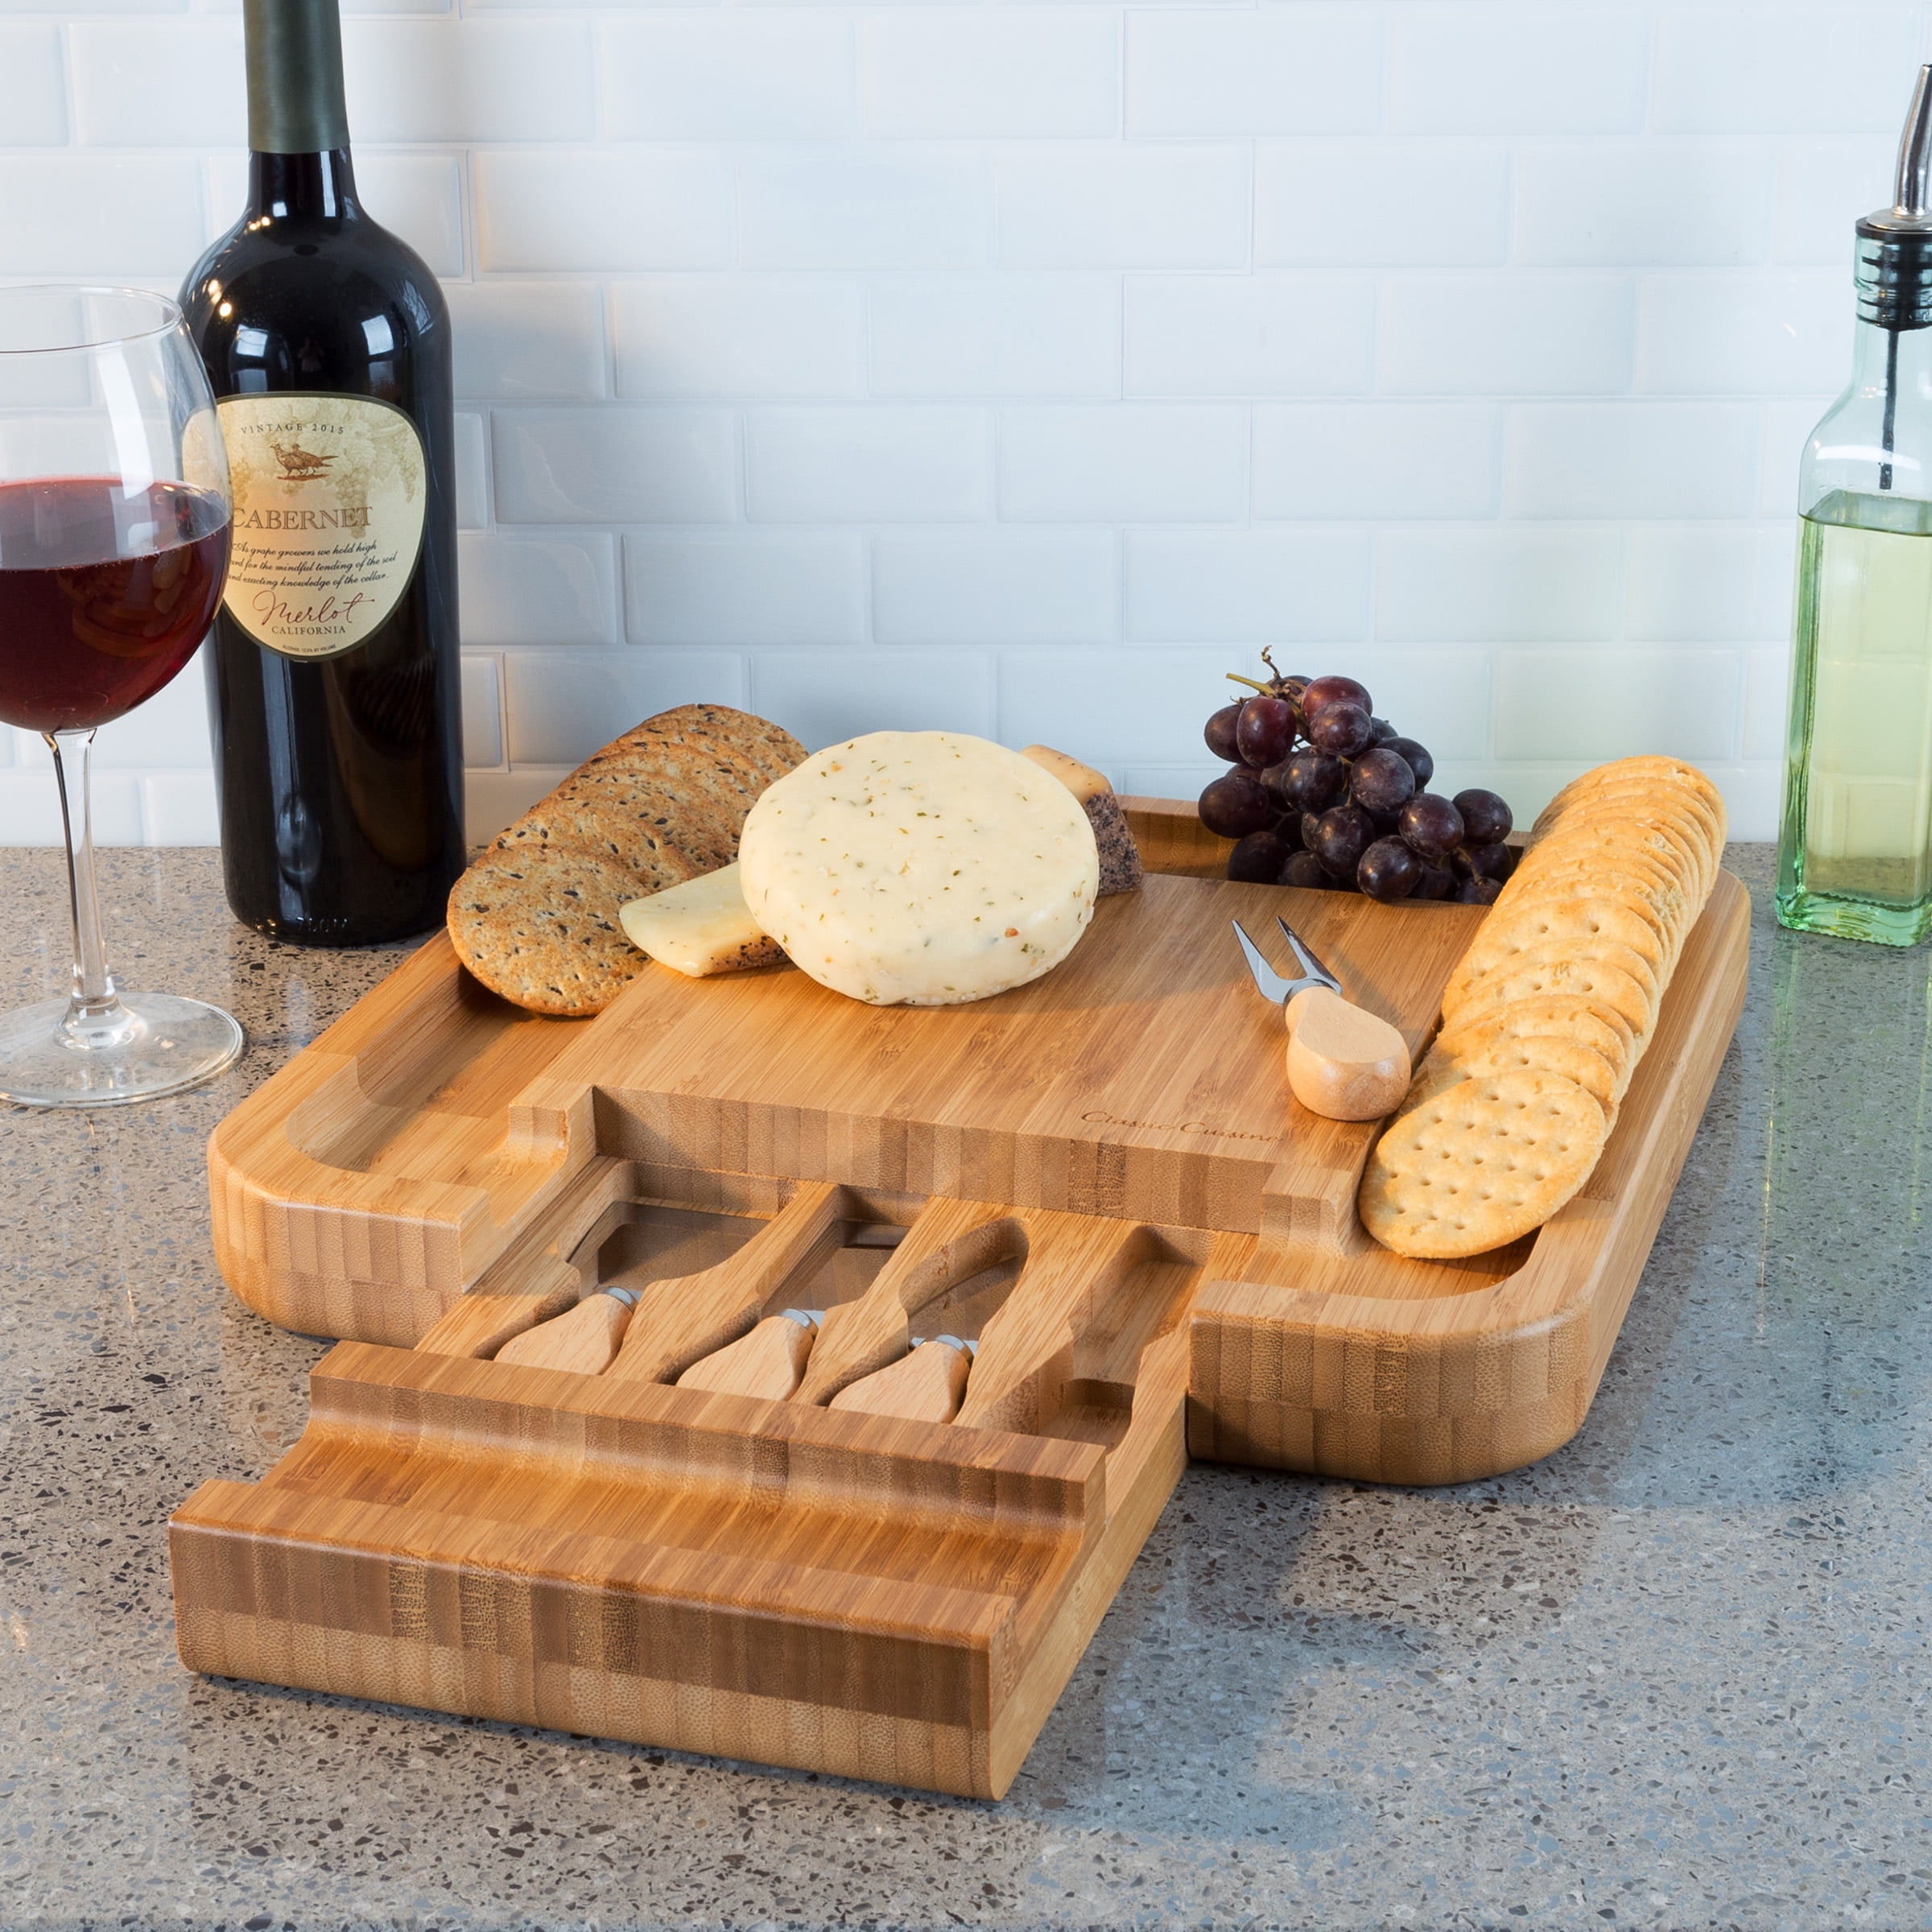 Bamboo Serving Platter Tray Cheese Charcuterie Decorative Bathroom Kitchen Dish Eco-Friendly Wood 2 Mediums 14 x 9.5, Natural Bamboo 